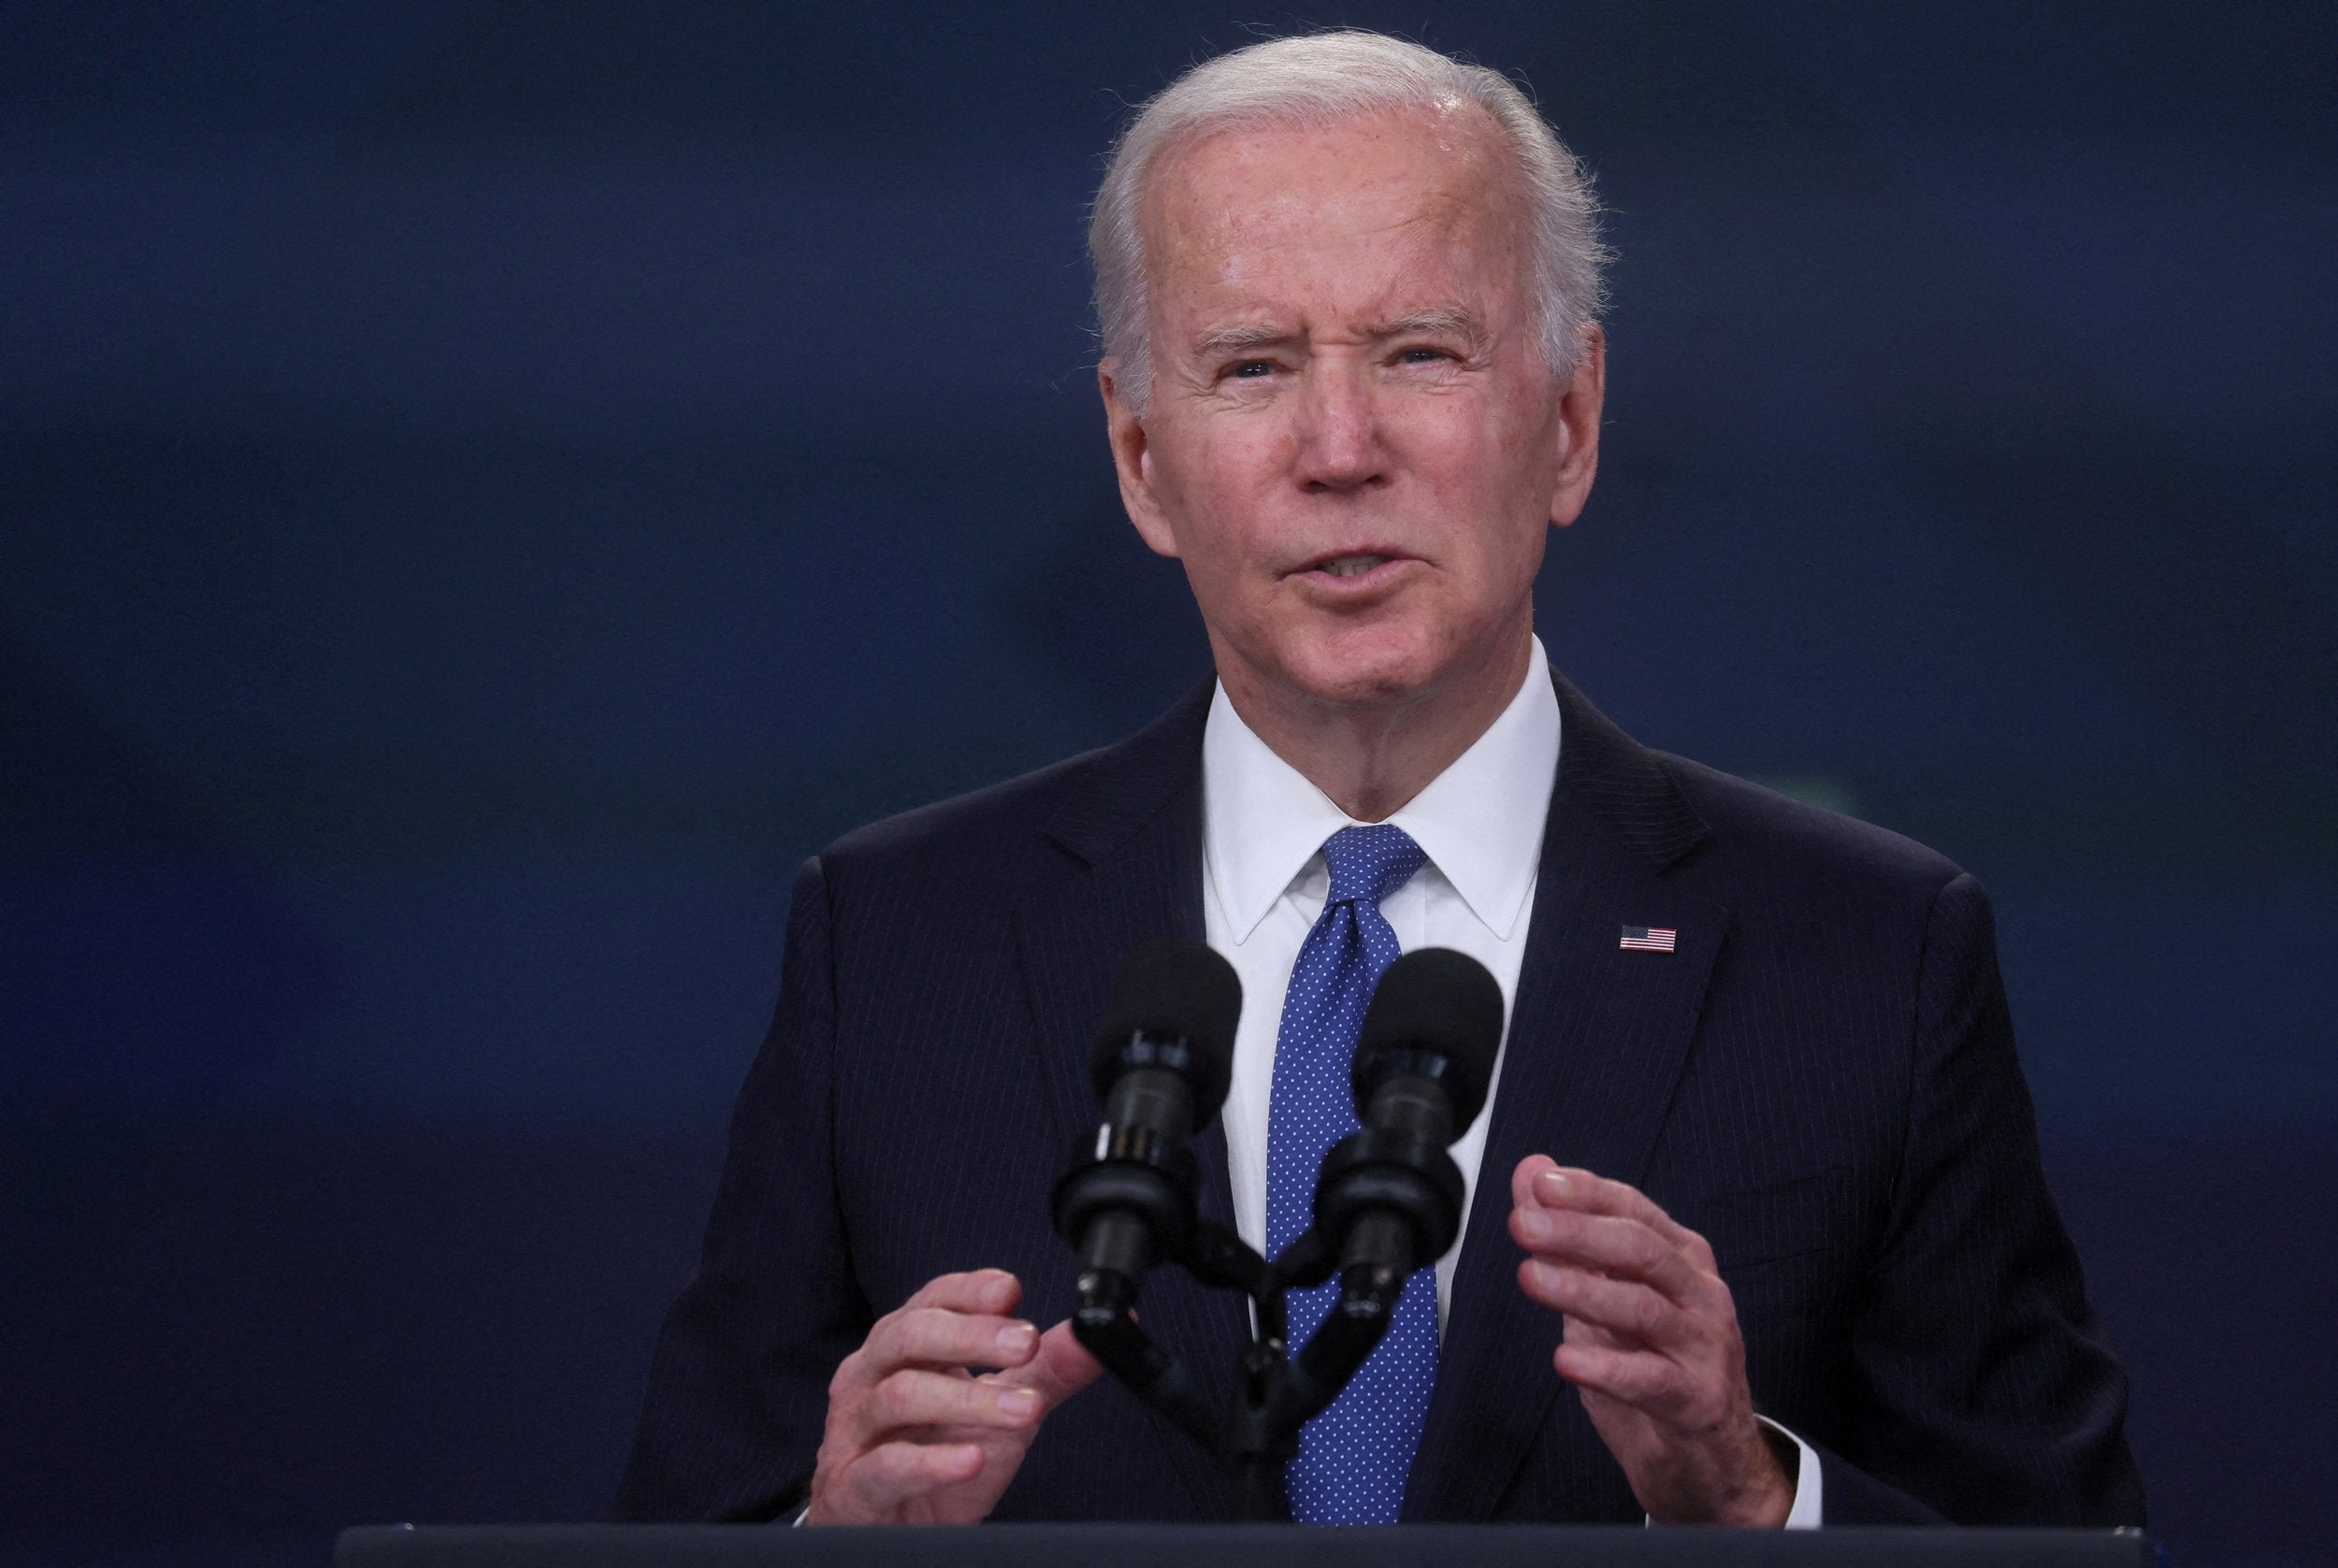 Classified documents from Biden's vice presidency found at think tank